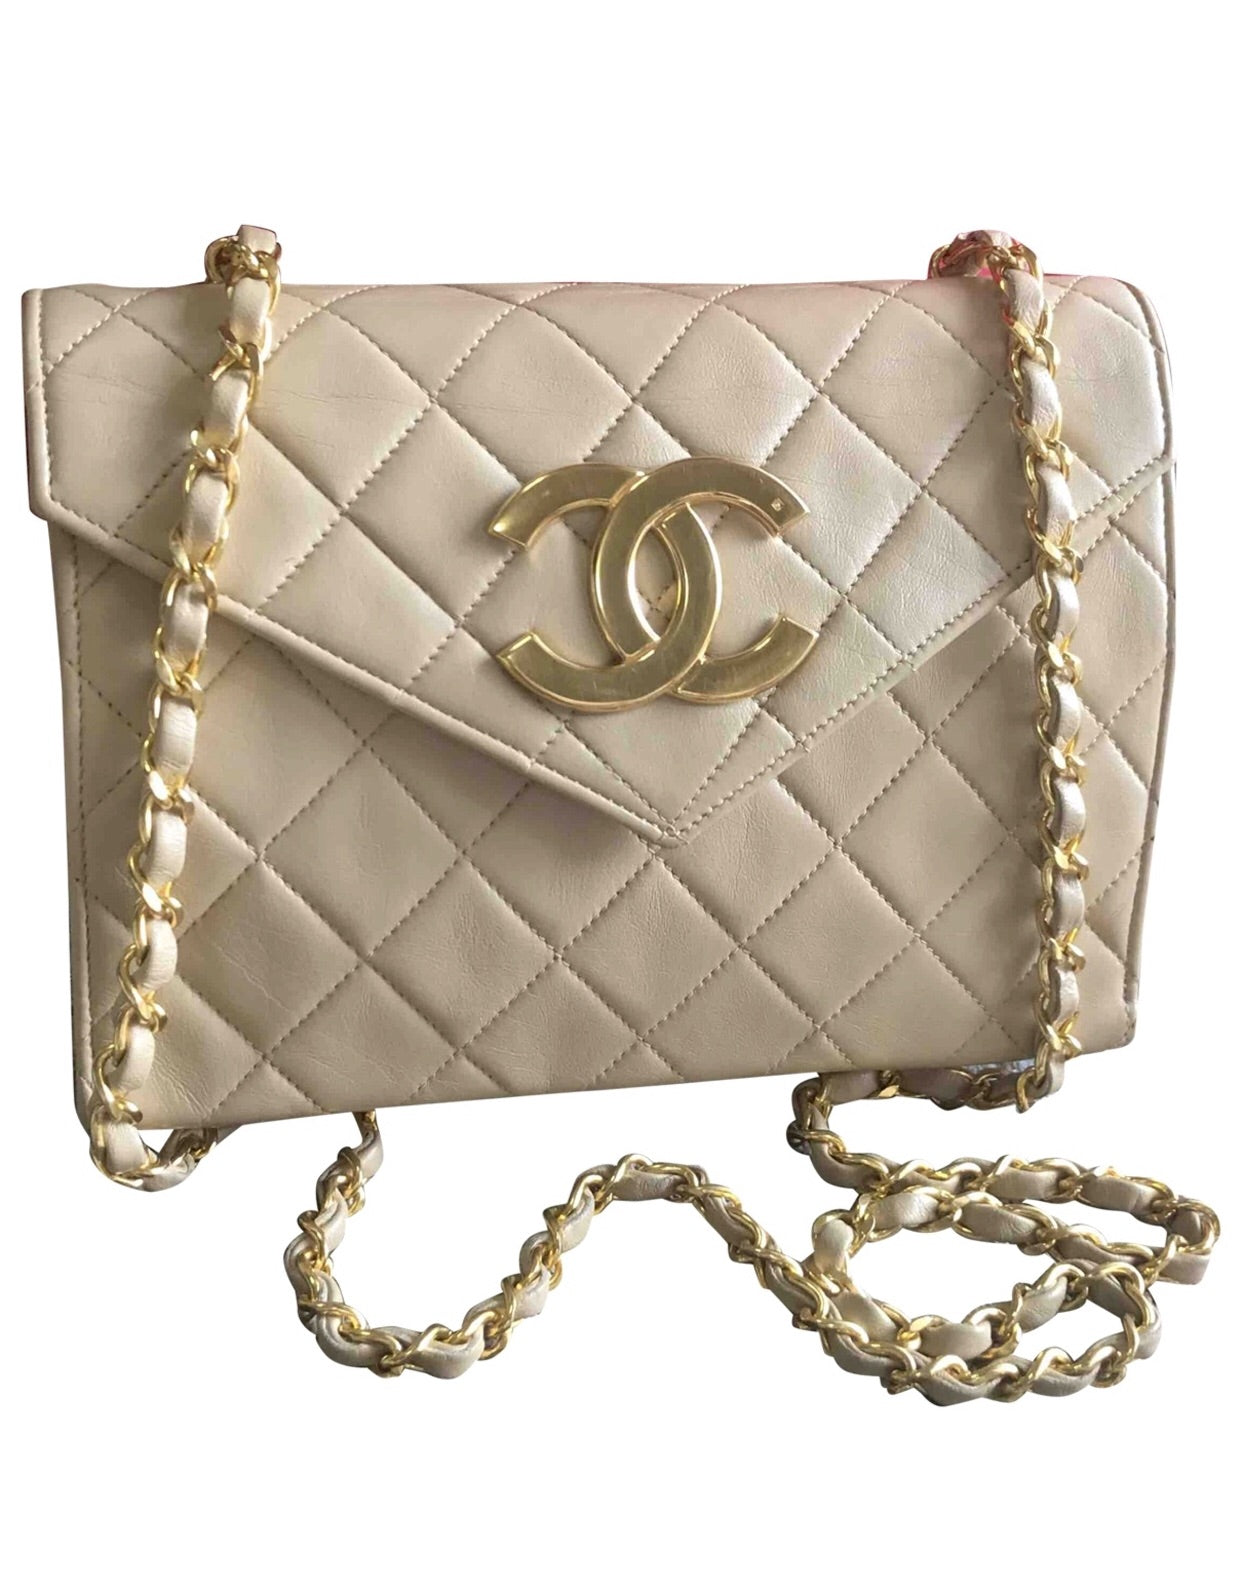 CHANEL, Bags, Vintage Classic Chanel